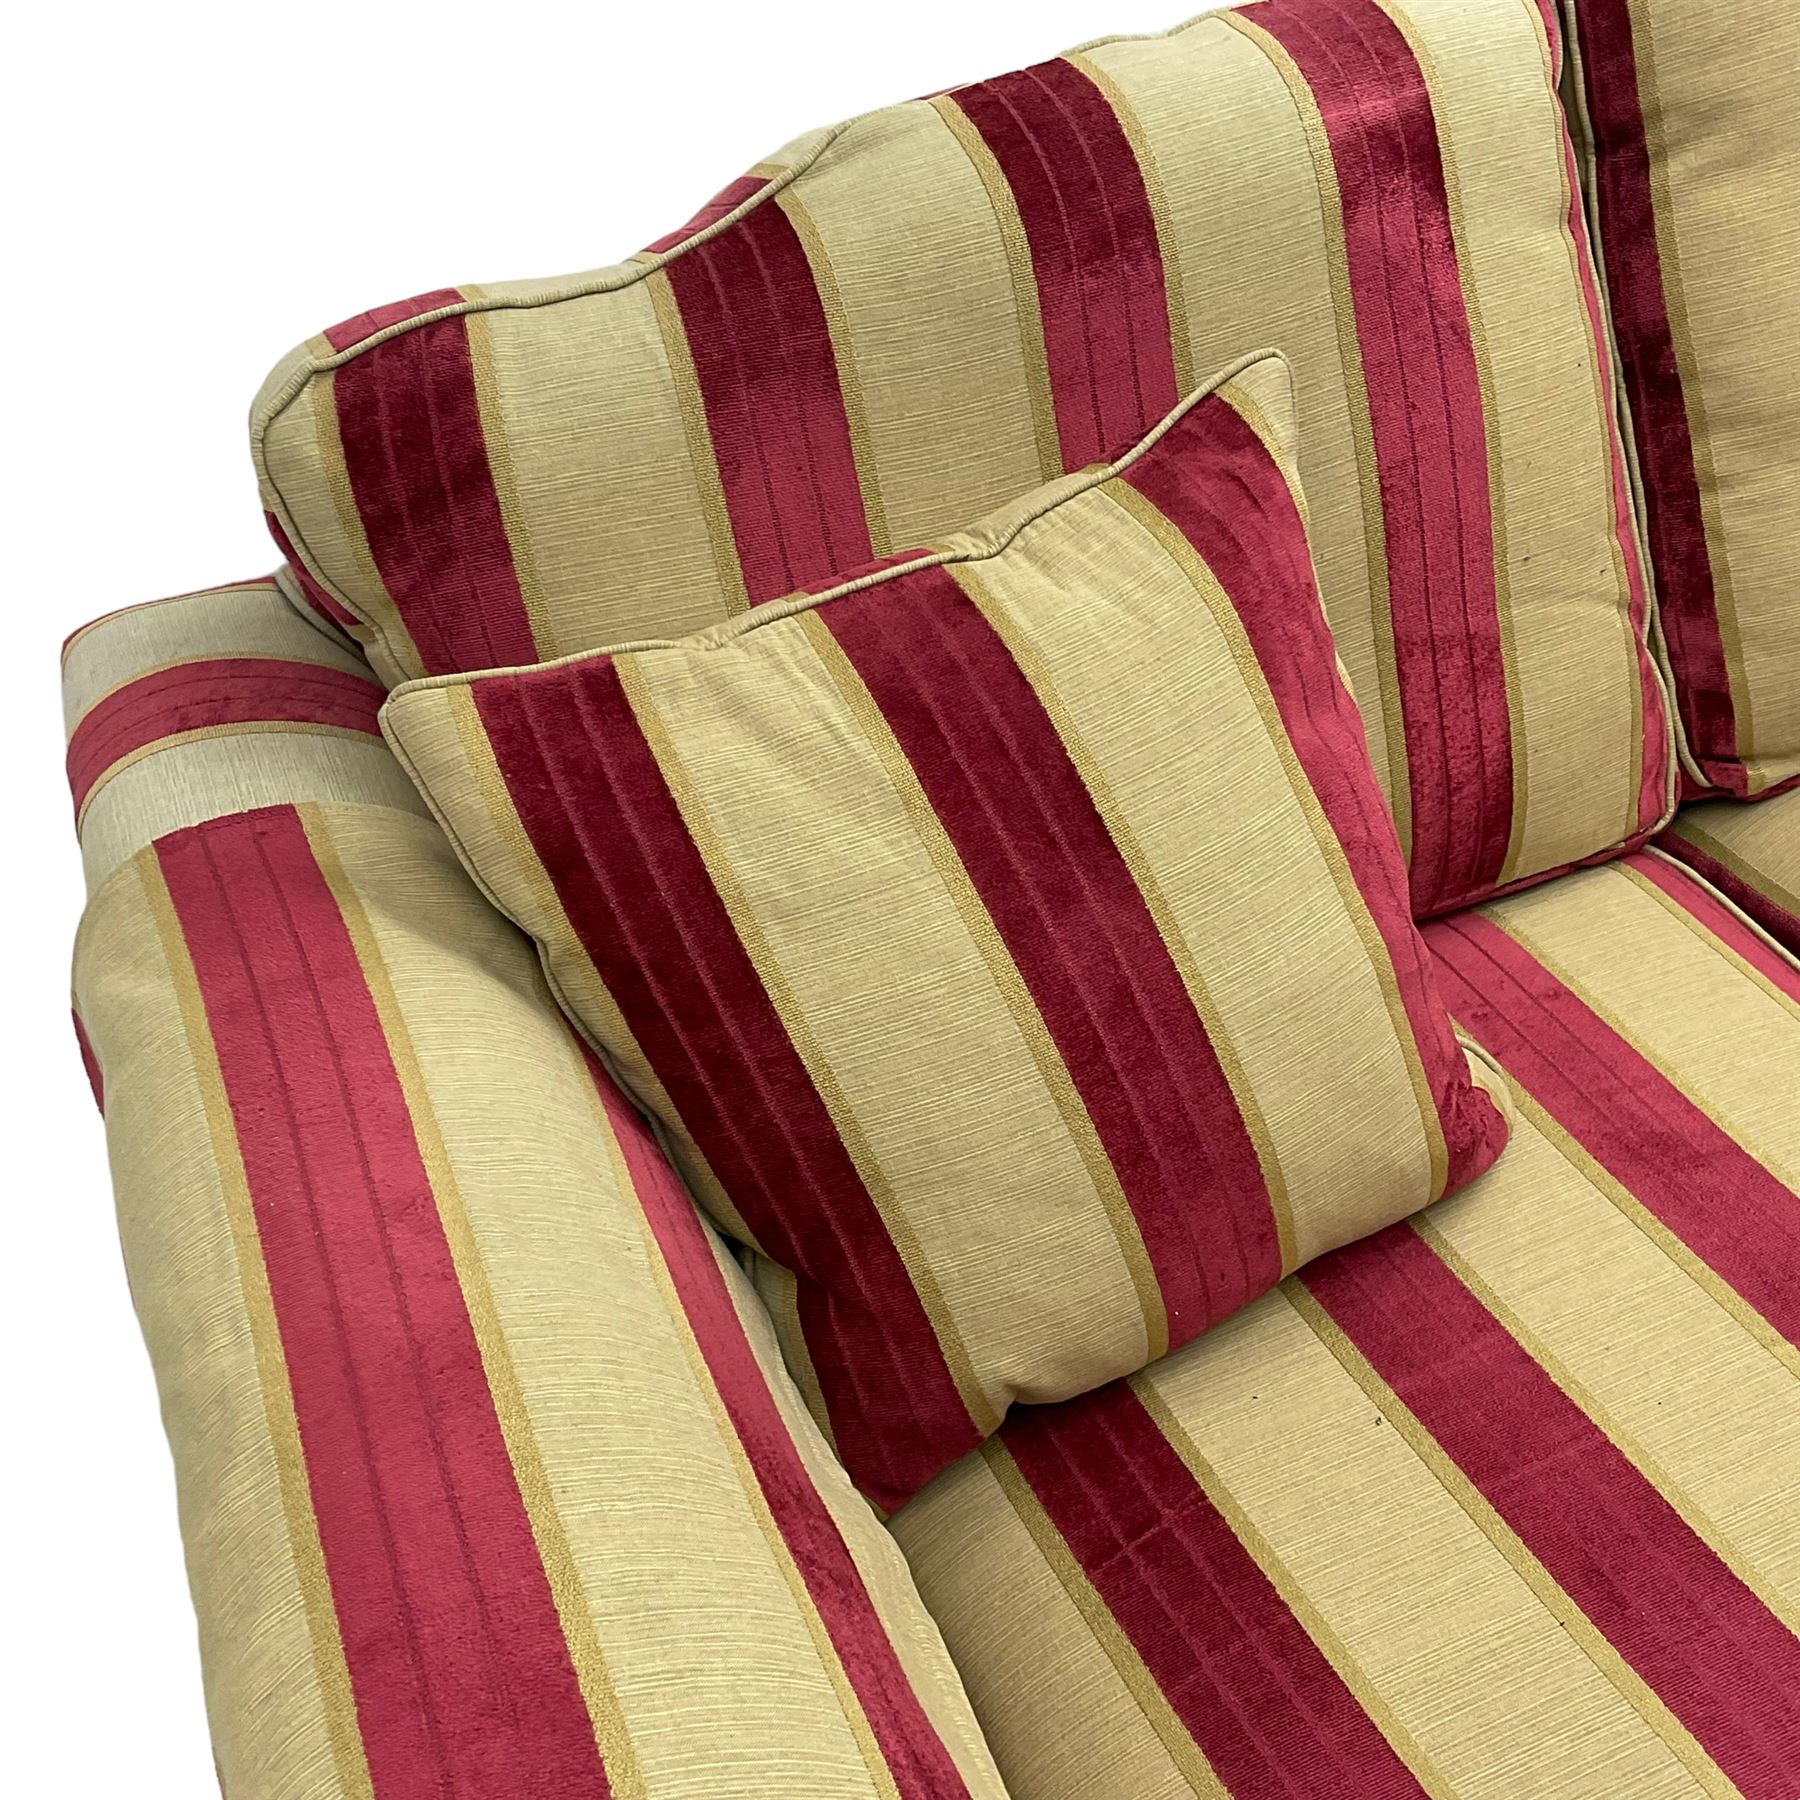 Three-piece lounge suite - large two-seat sofa upholstered in red and gold striped fabric (W185cm - Image 19 of 24